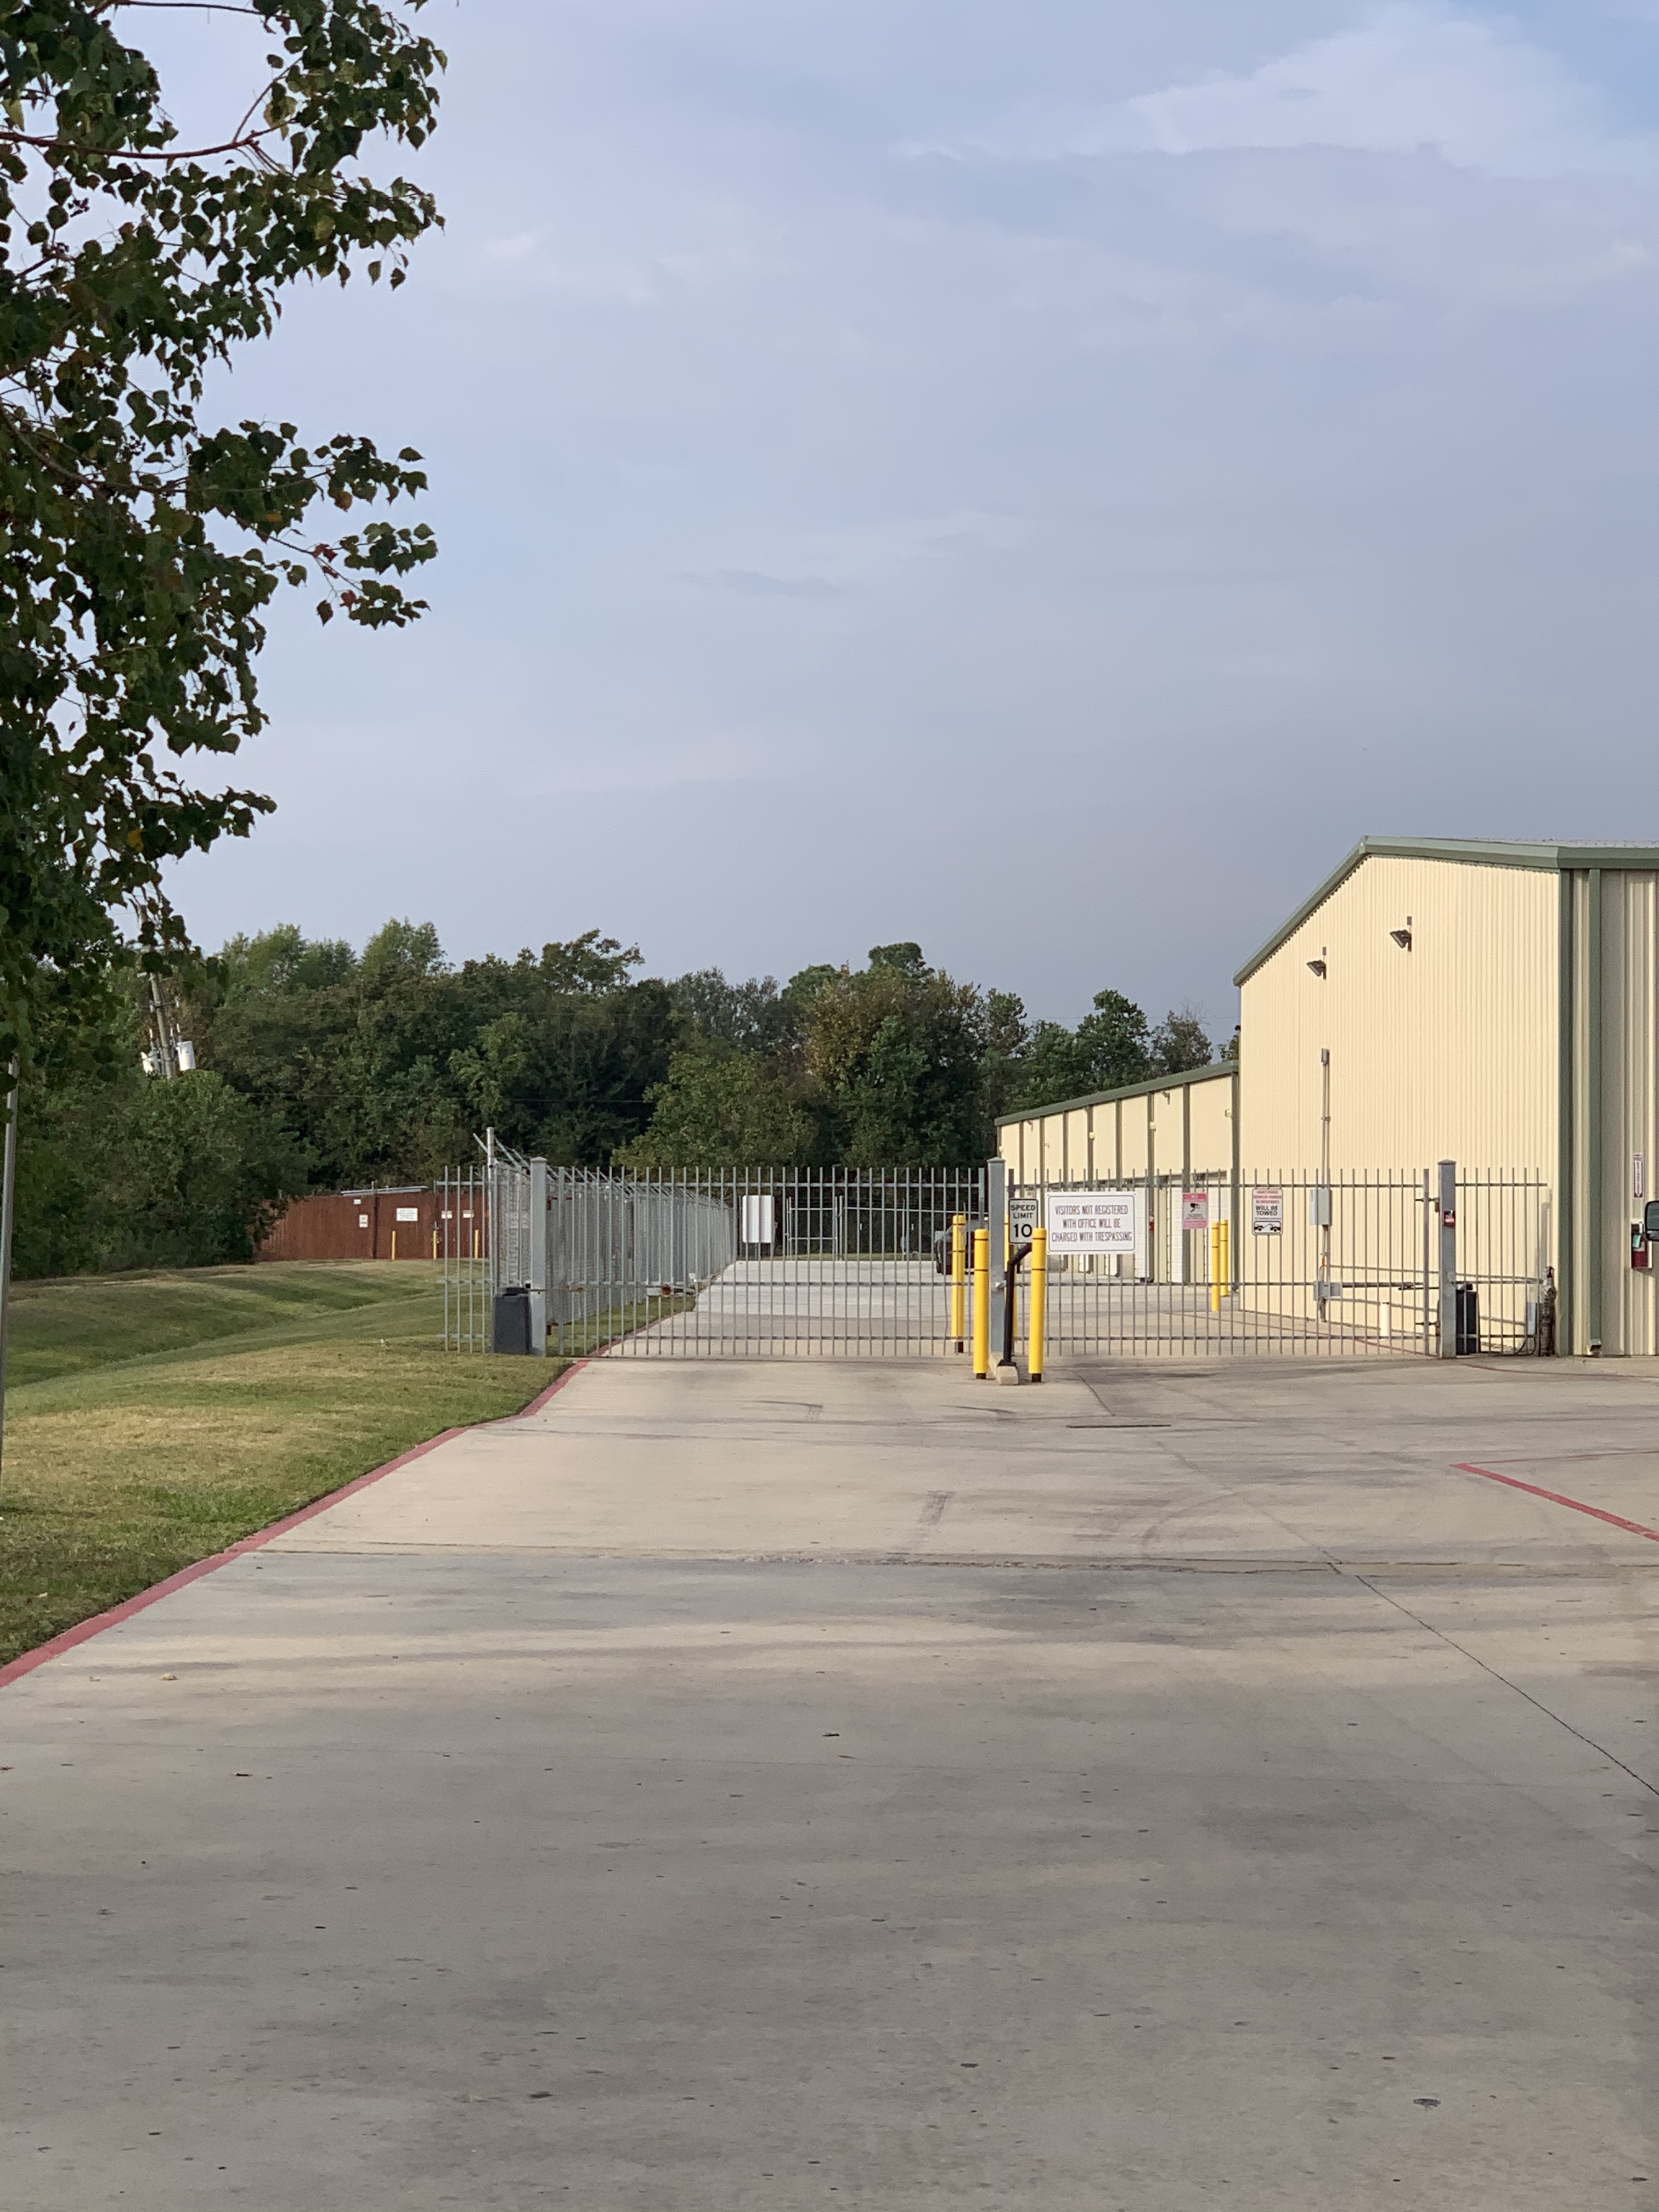 Fenced & Gated With Electronic Keypad Access For Wood RV & Self Storage Facility